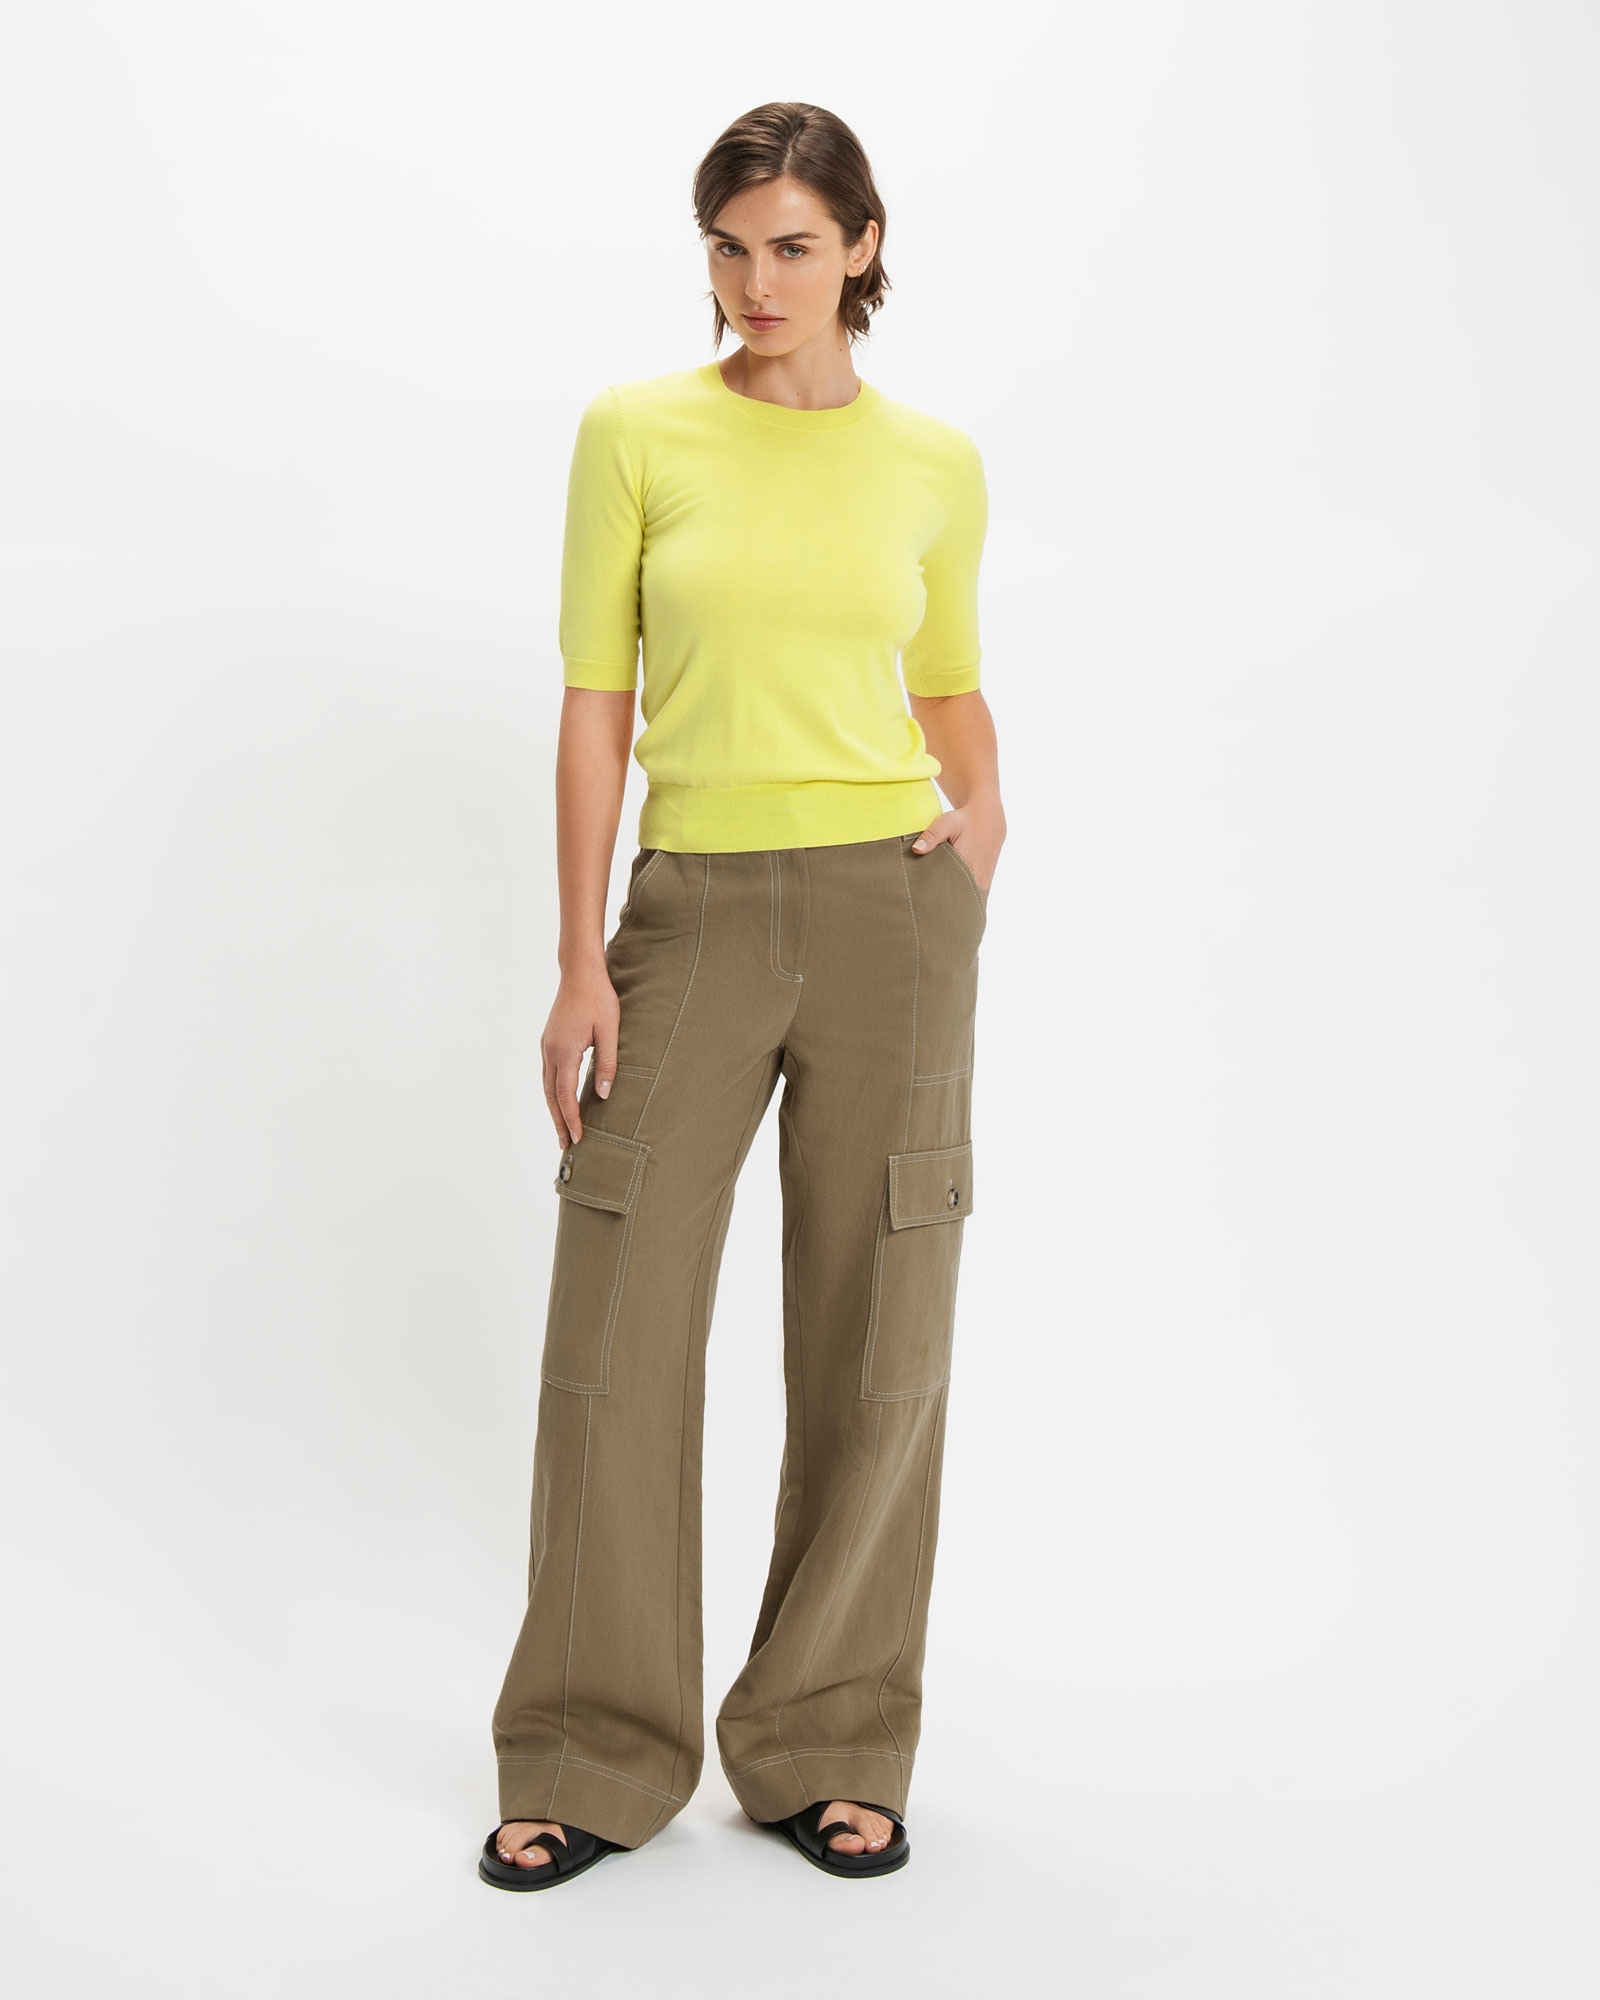 Tops and Shirts | Elbow Sleeve Round Neck Knit | 200 Lemon